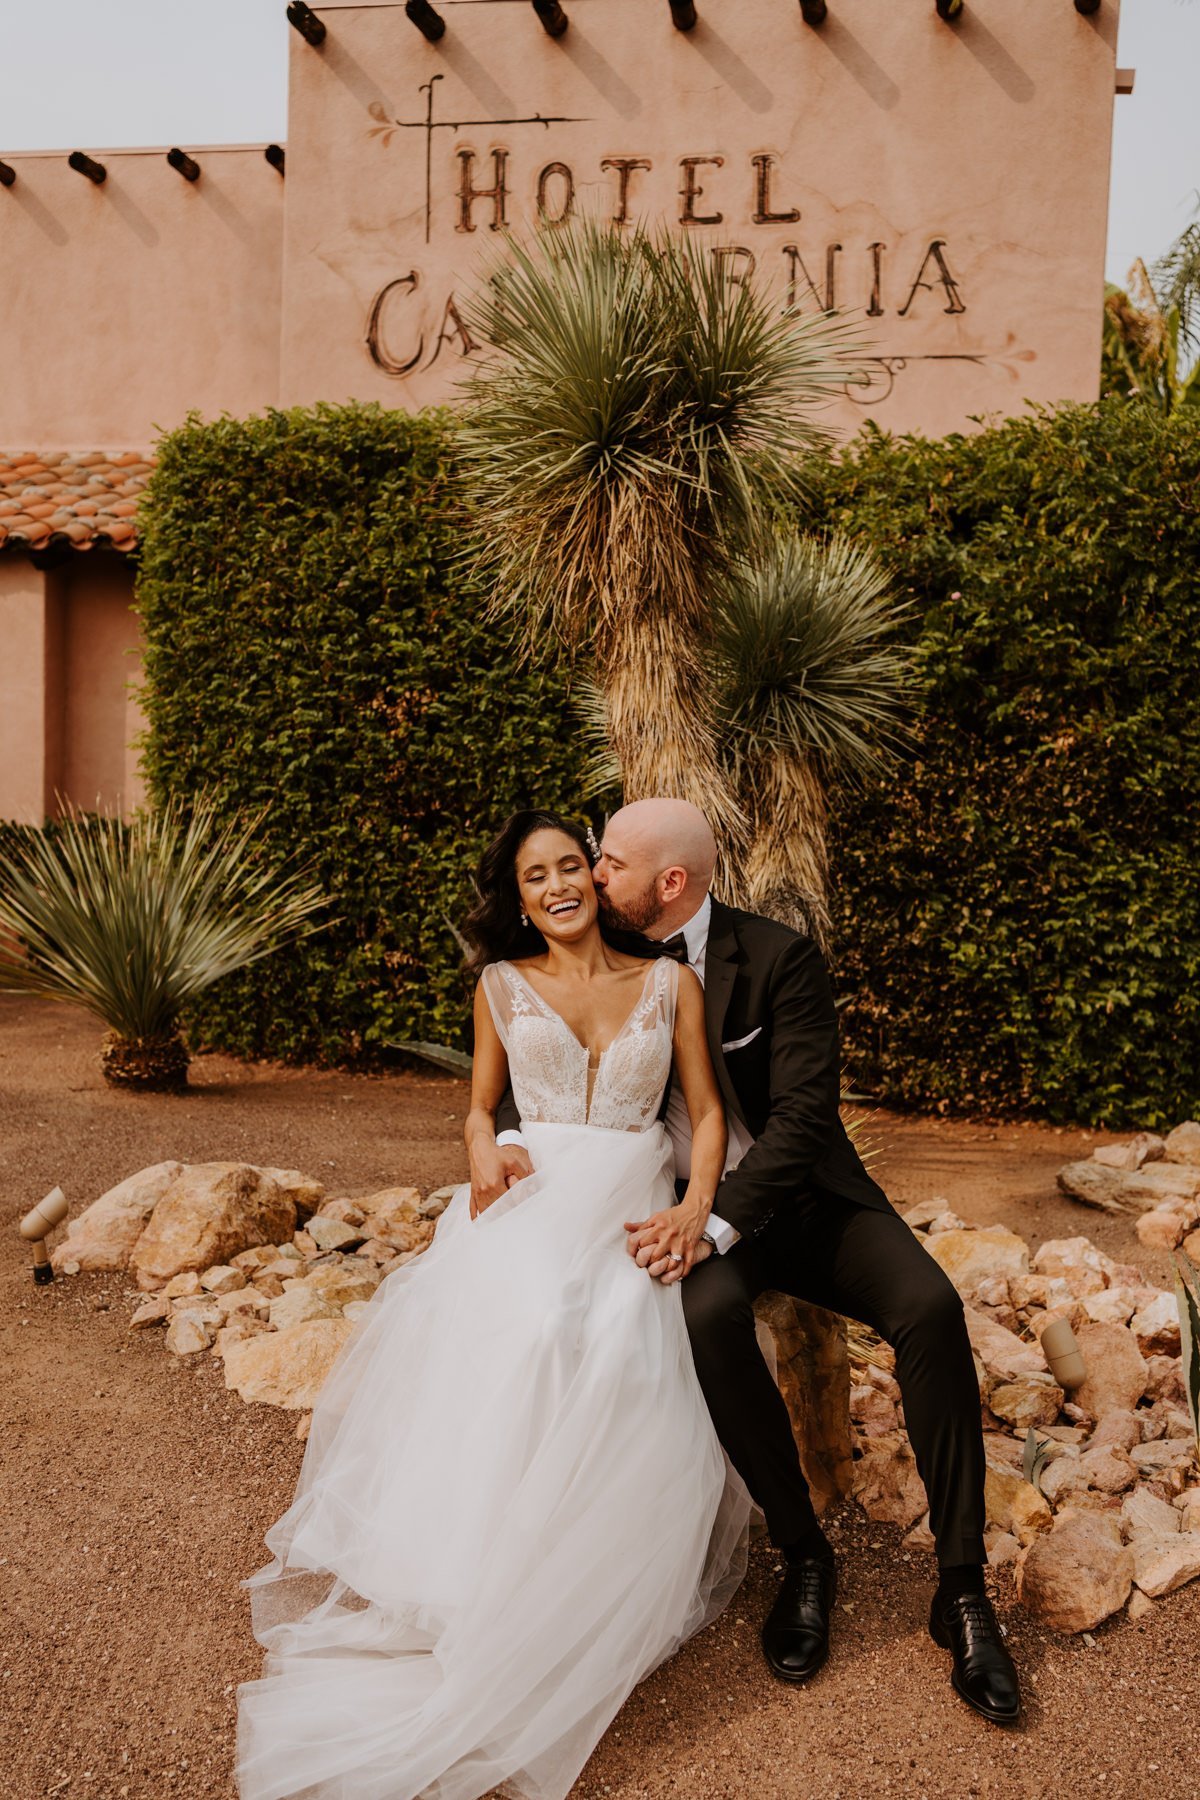 Hotel California Palm Springs, Bride and groom, Palm Springs Elopement, Photography by Tida Svy